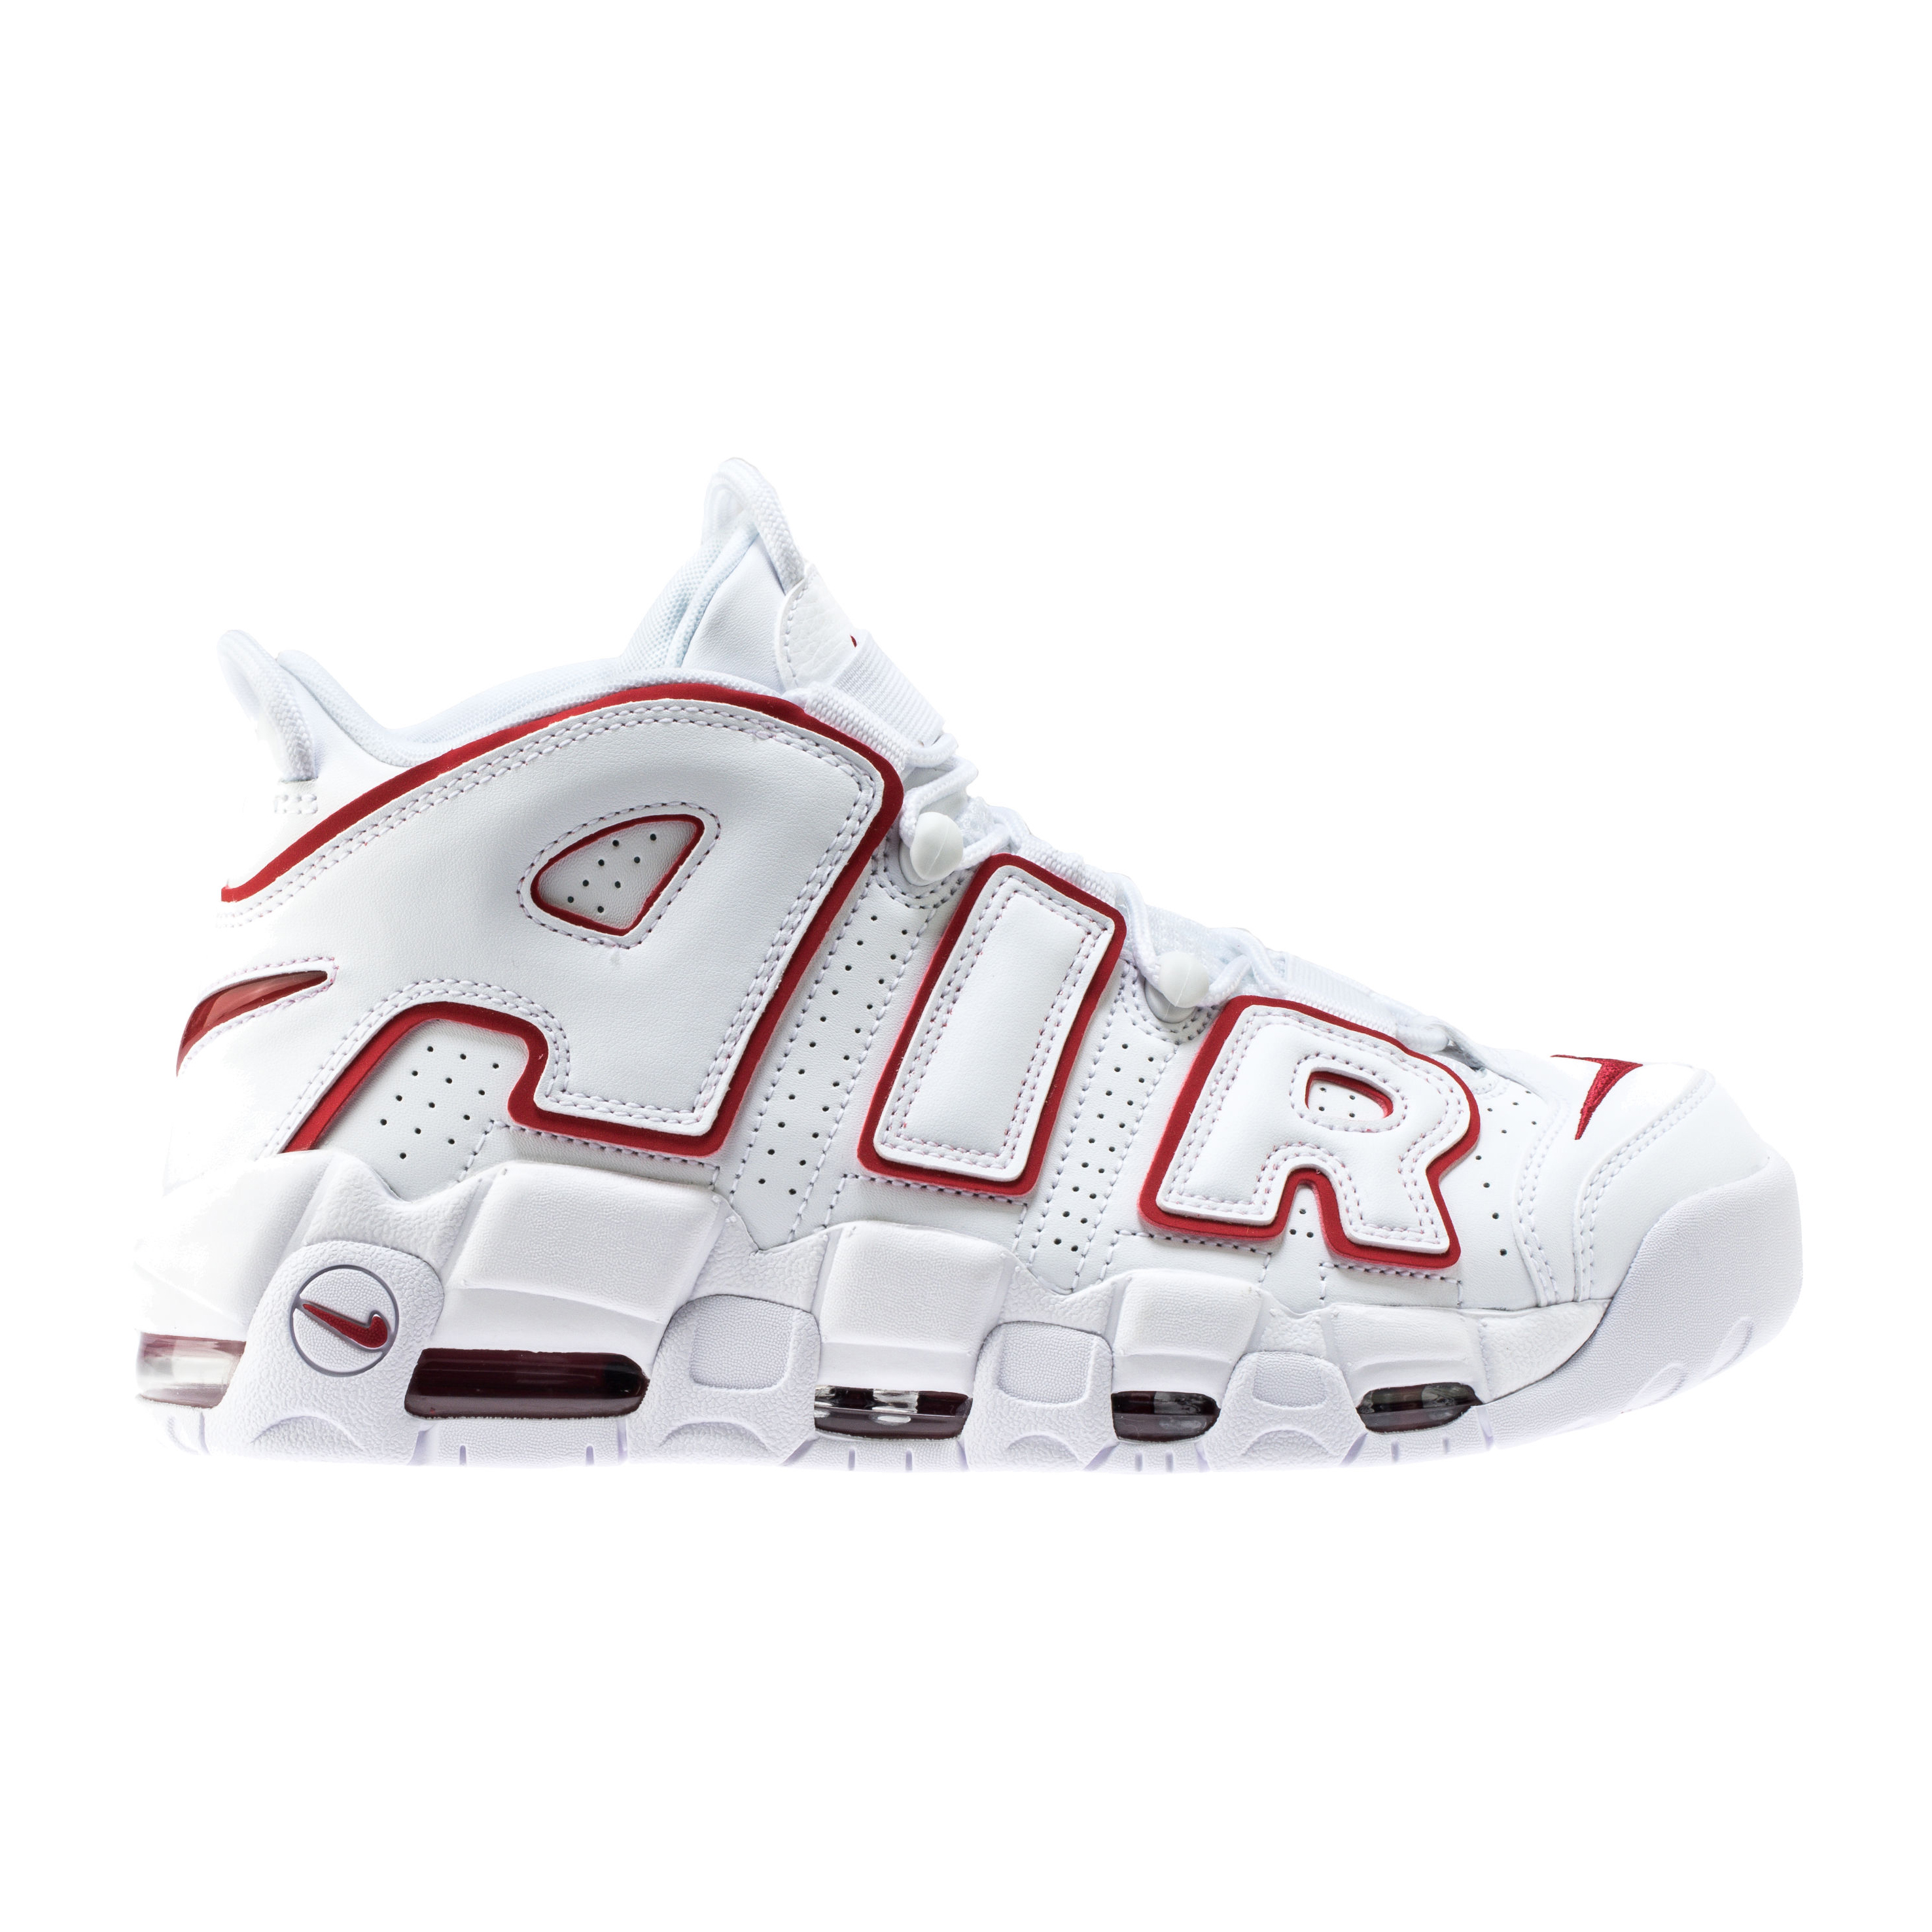 Official Images of the OG Nike Air More 